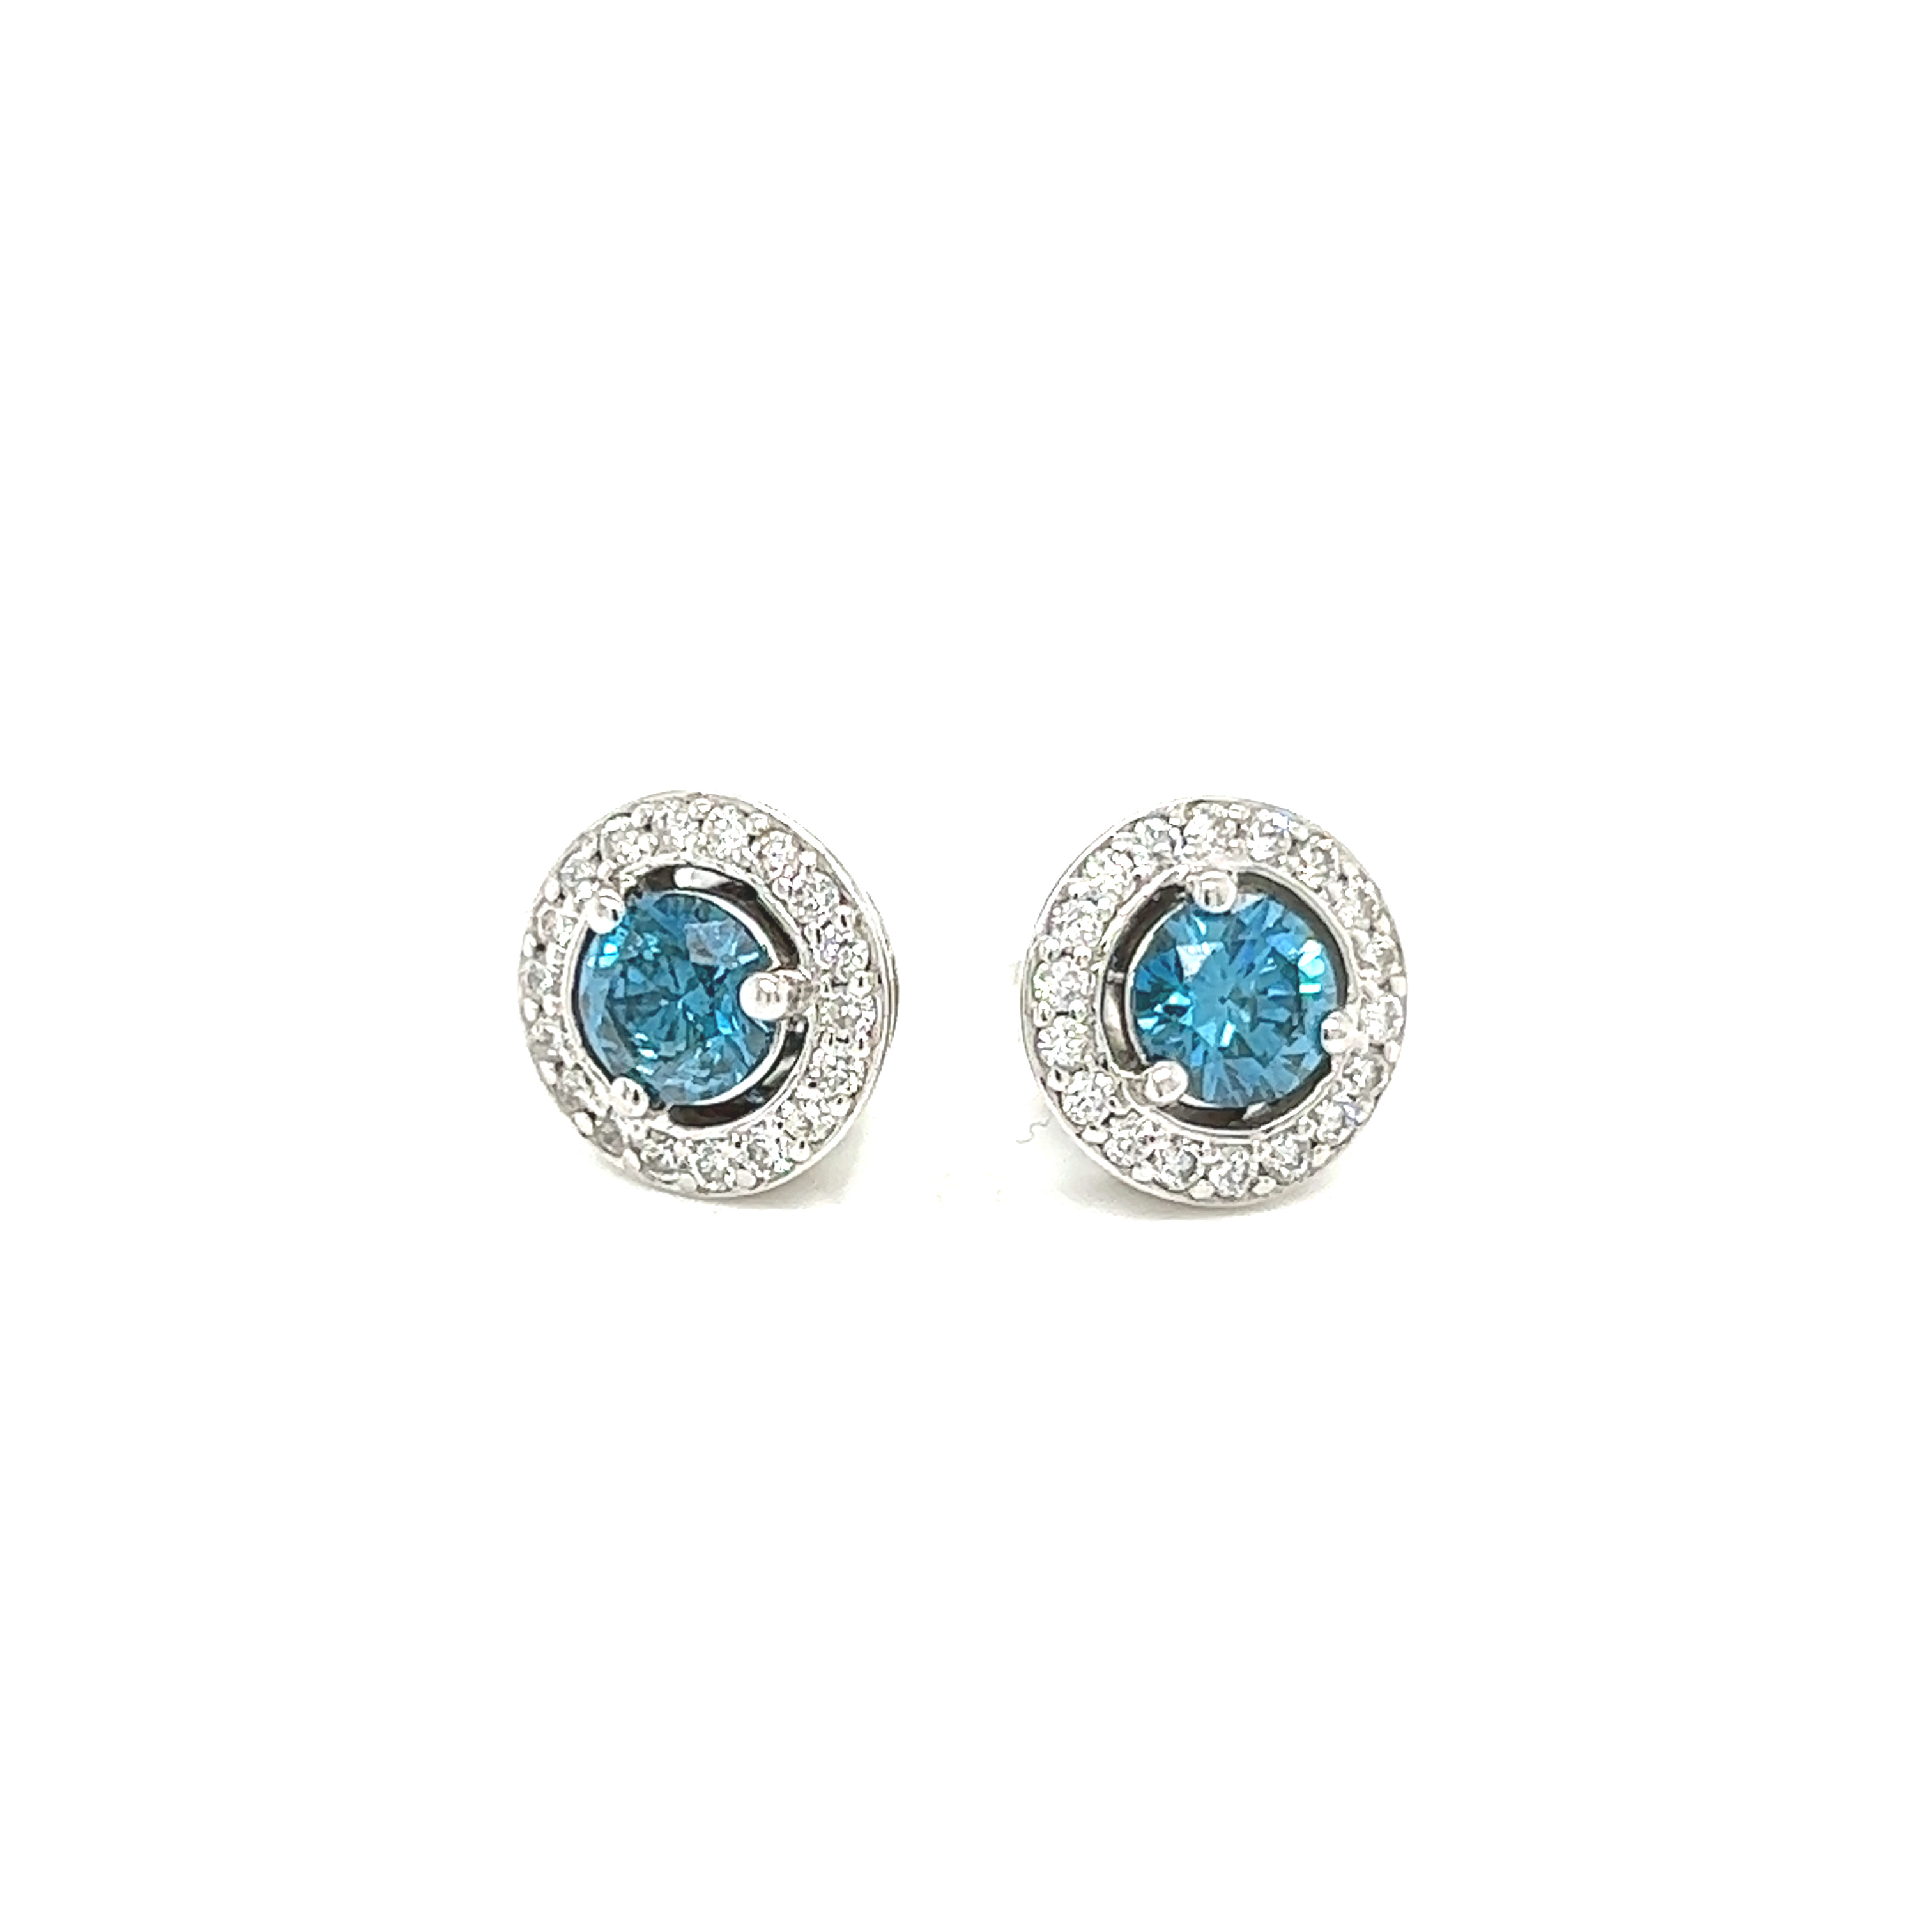 14 karat white gold halo earrings with 38=1.30tw round brilliant Diamonds including two irradiated blue center Diamonds  REF#150-1995